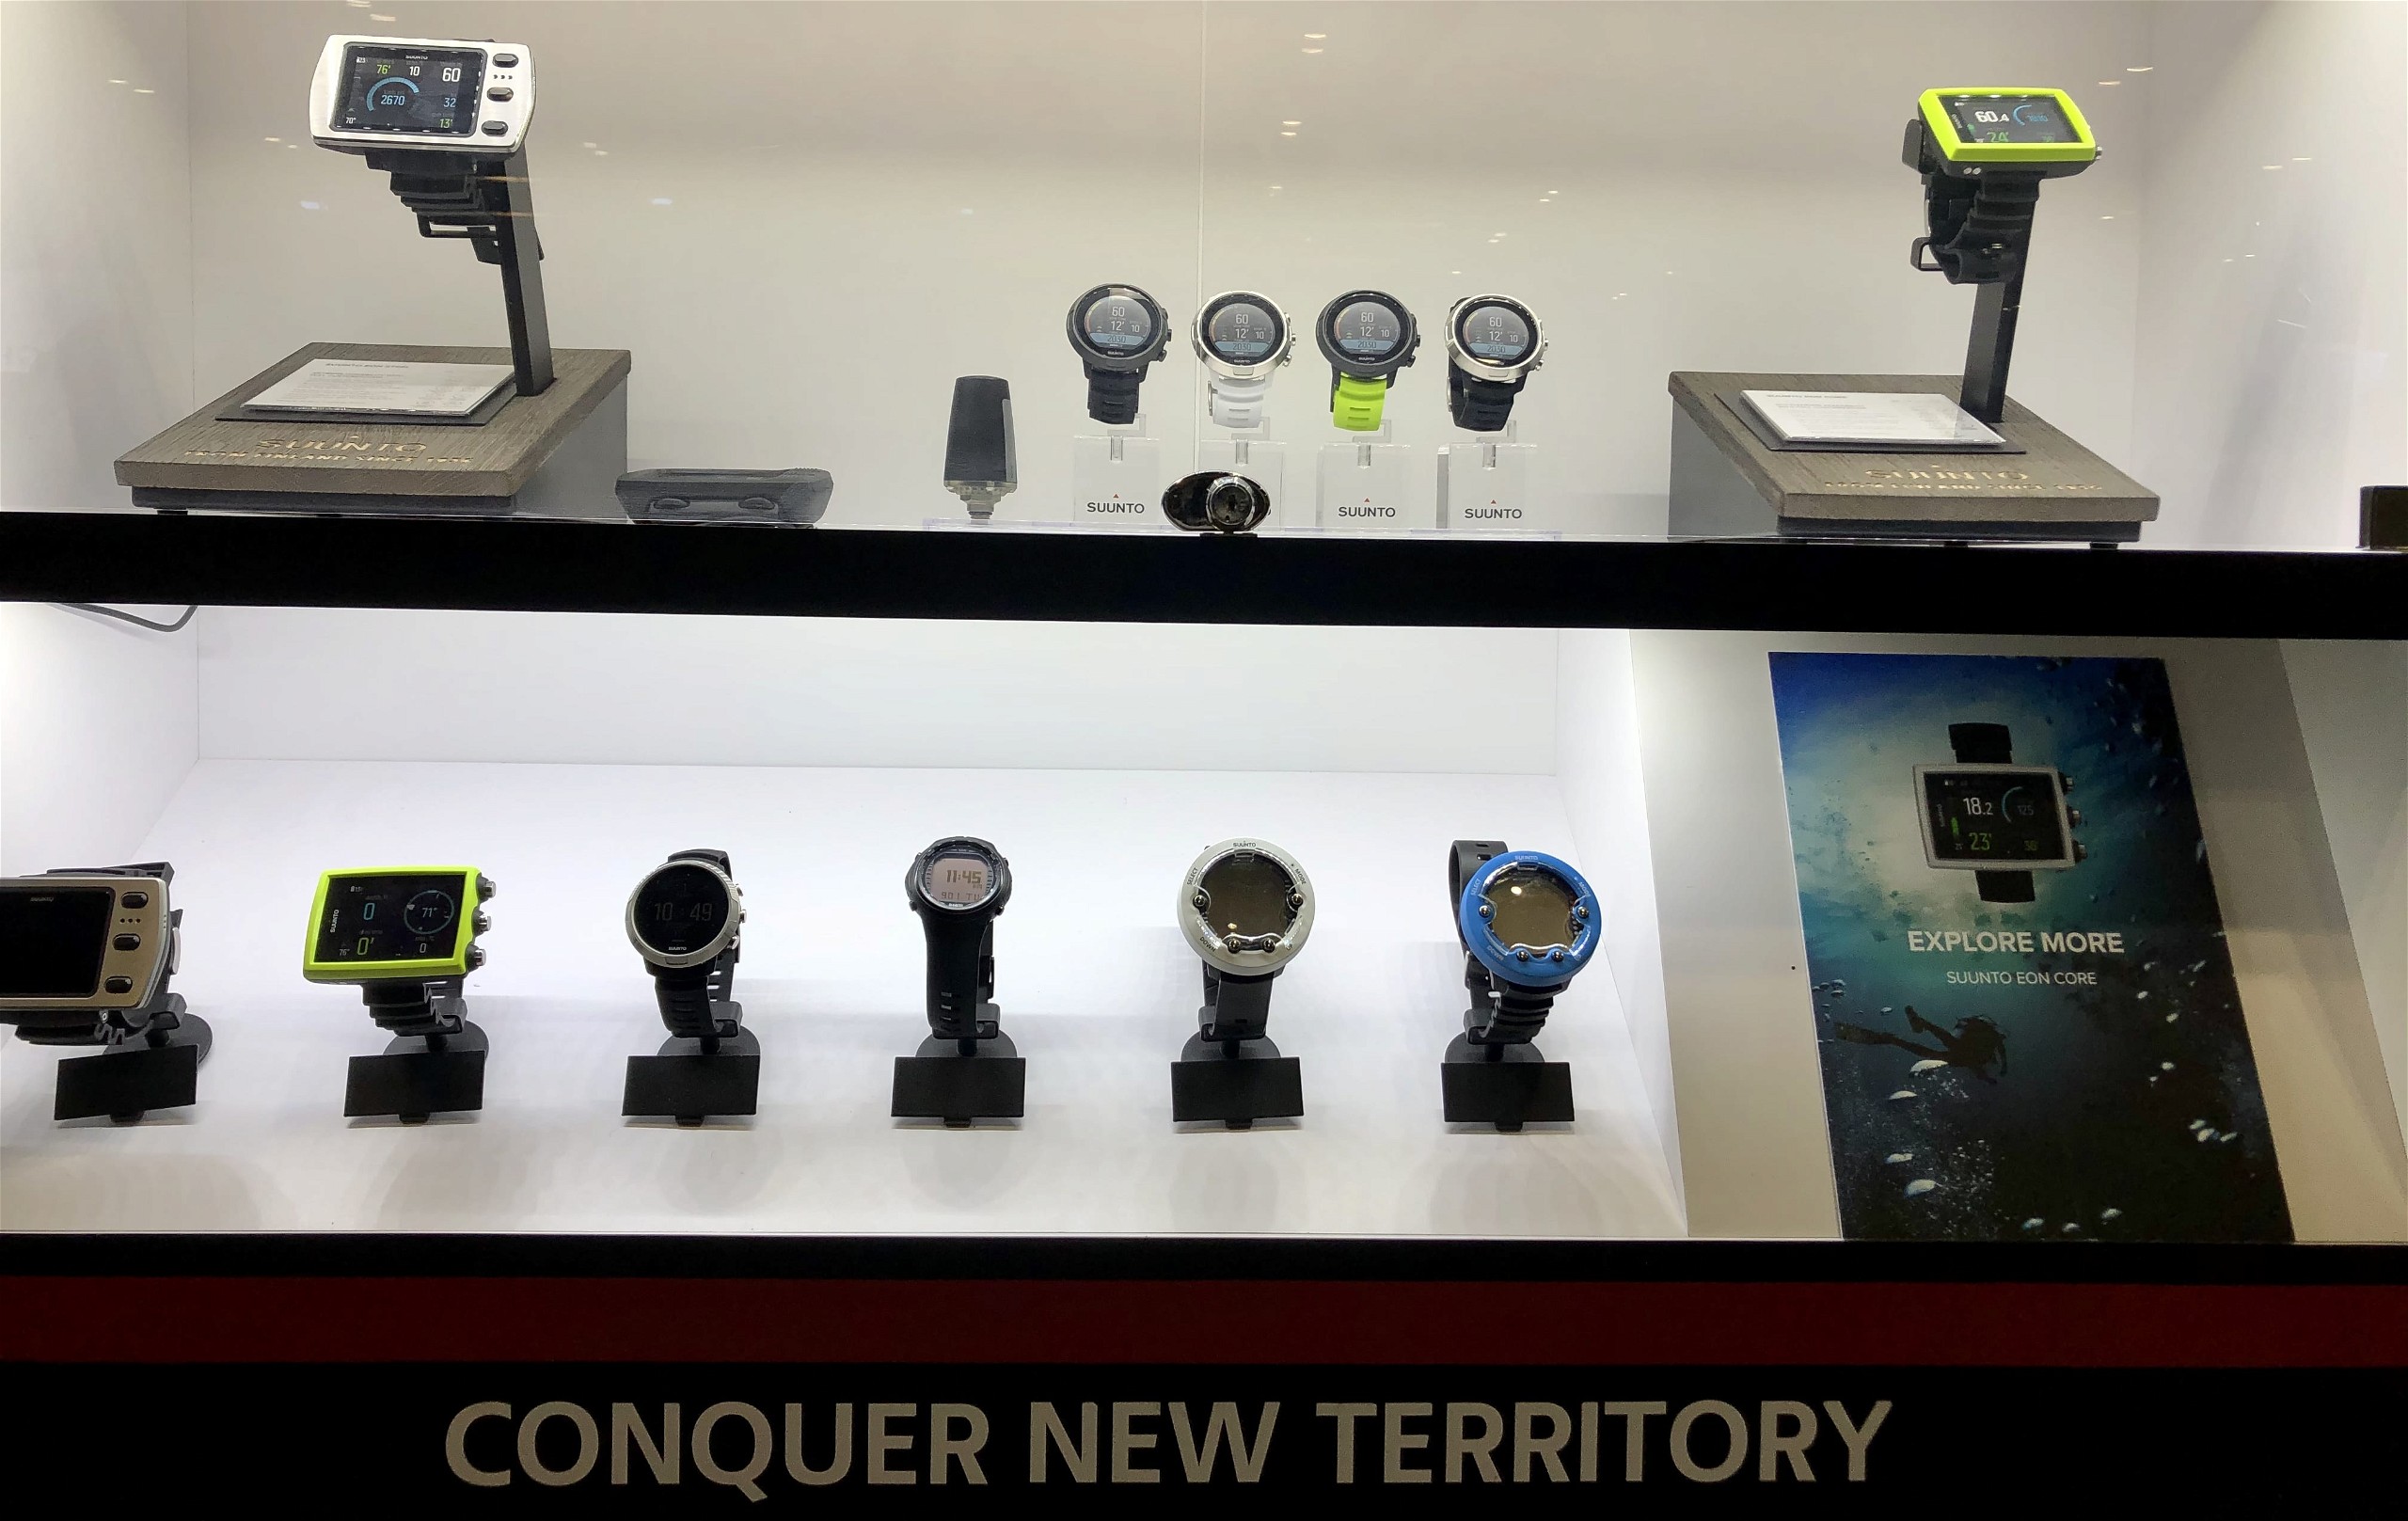 The folks at Suunto are highlighting the full range of the company's dive products this year at DEMA Show, following the launch of the Suunto D5 last year.